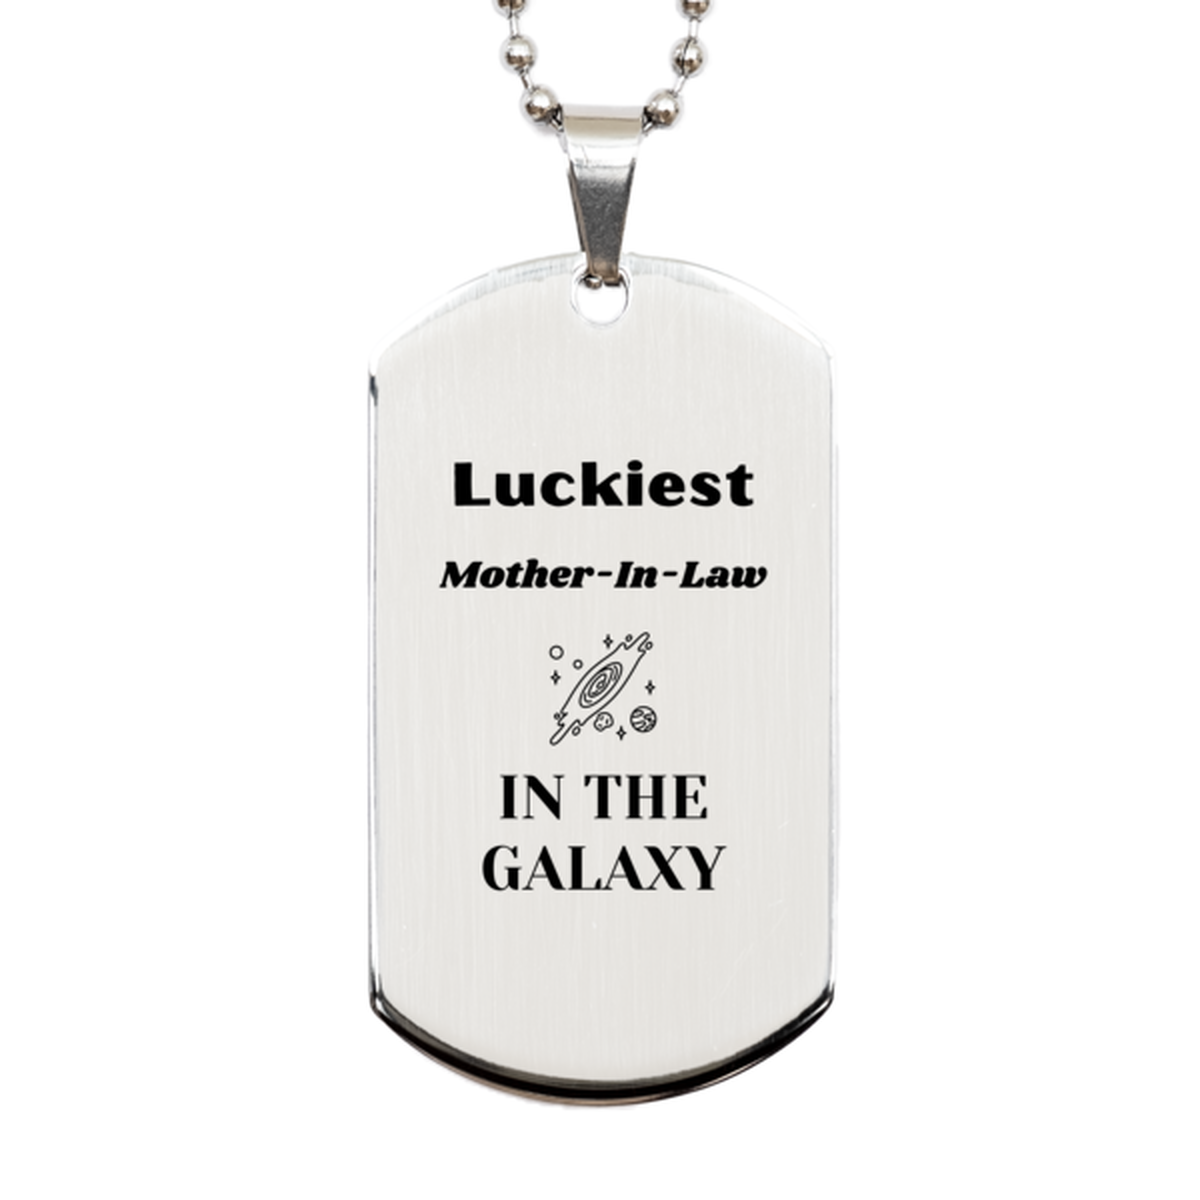 Luckiest Mother-In-Law in the Galaxy, To My Mother-In-Law Engraved Gifts, Christmas Mother-In-Law Silver Dog Tag Gifts, X-mas Birthday Unique Gifts For Mother-In-Law Men Women